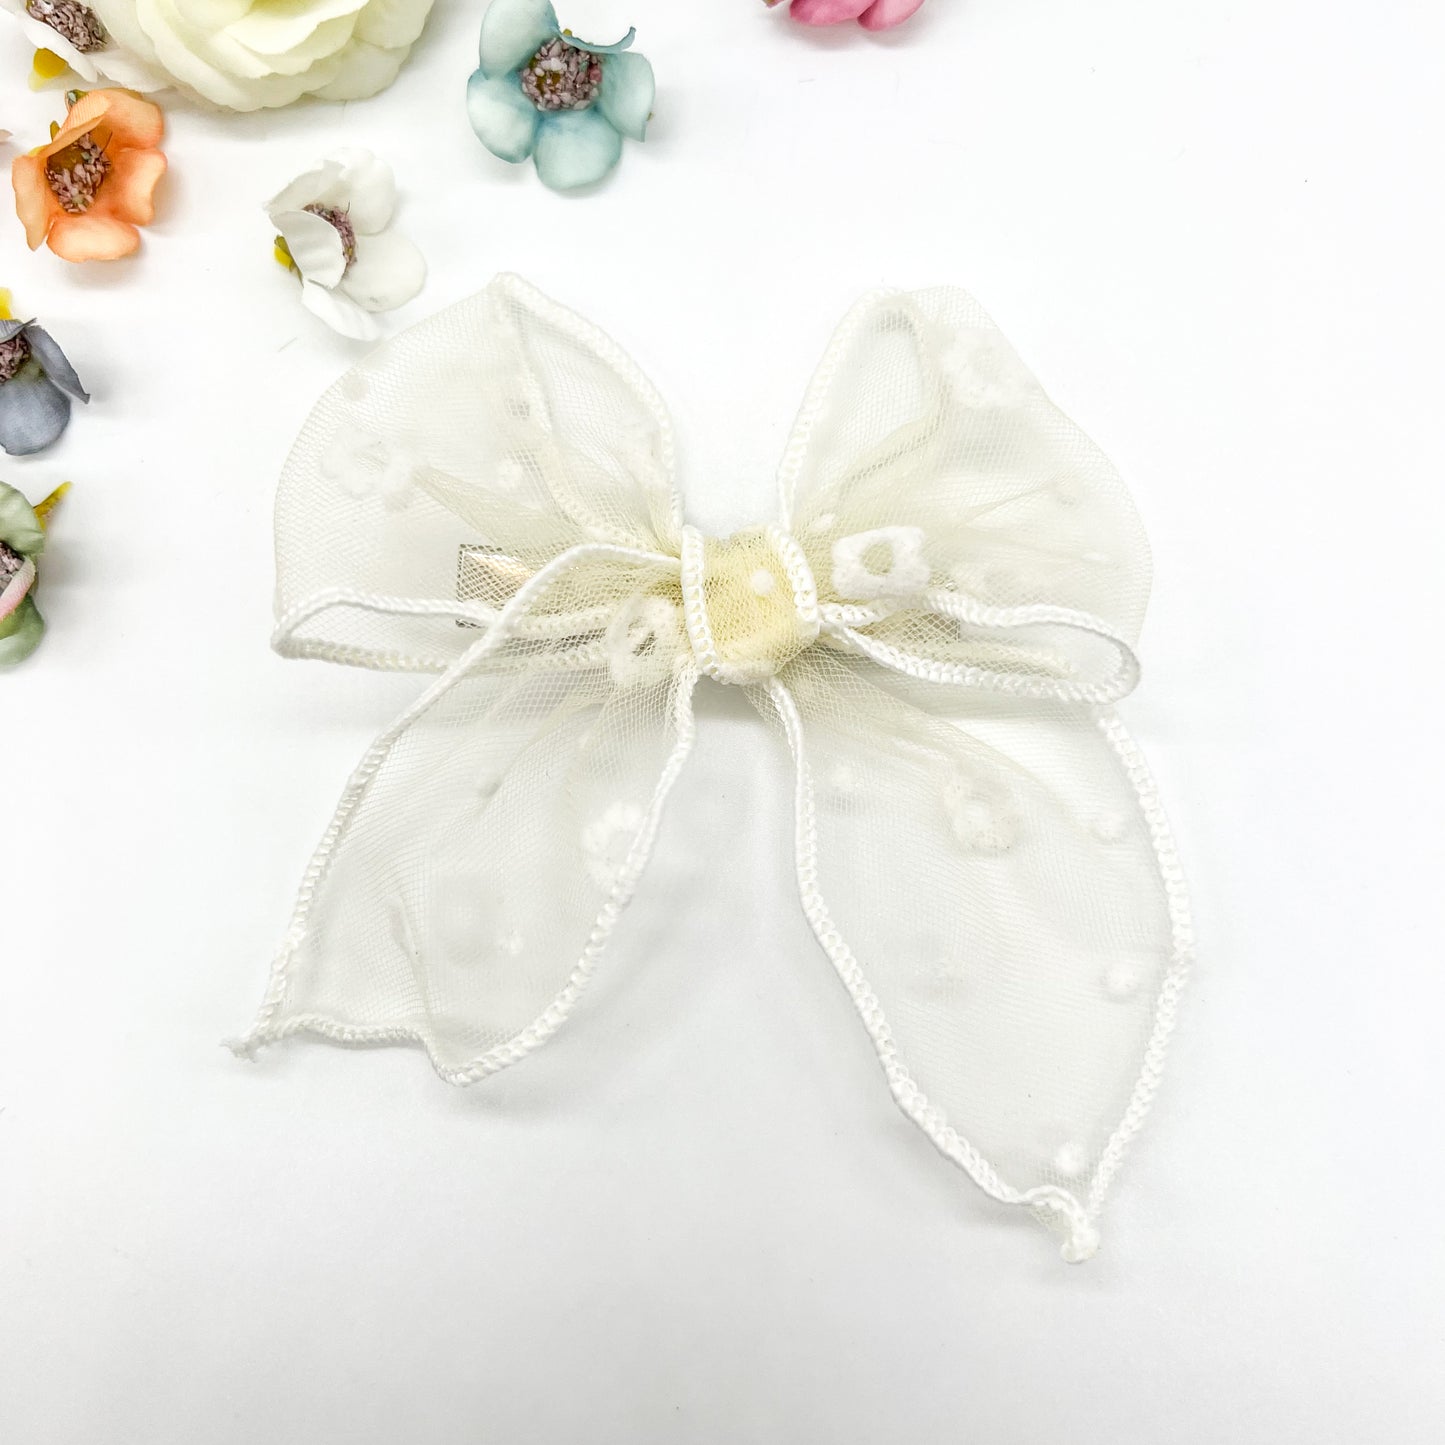 Hand Tied Spring Fabric Bow